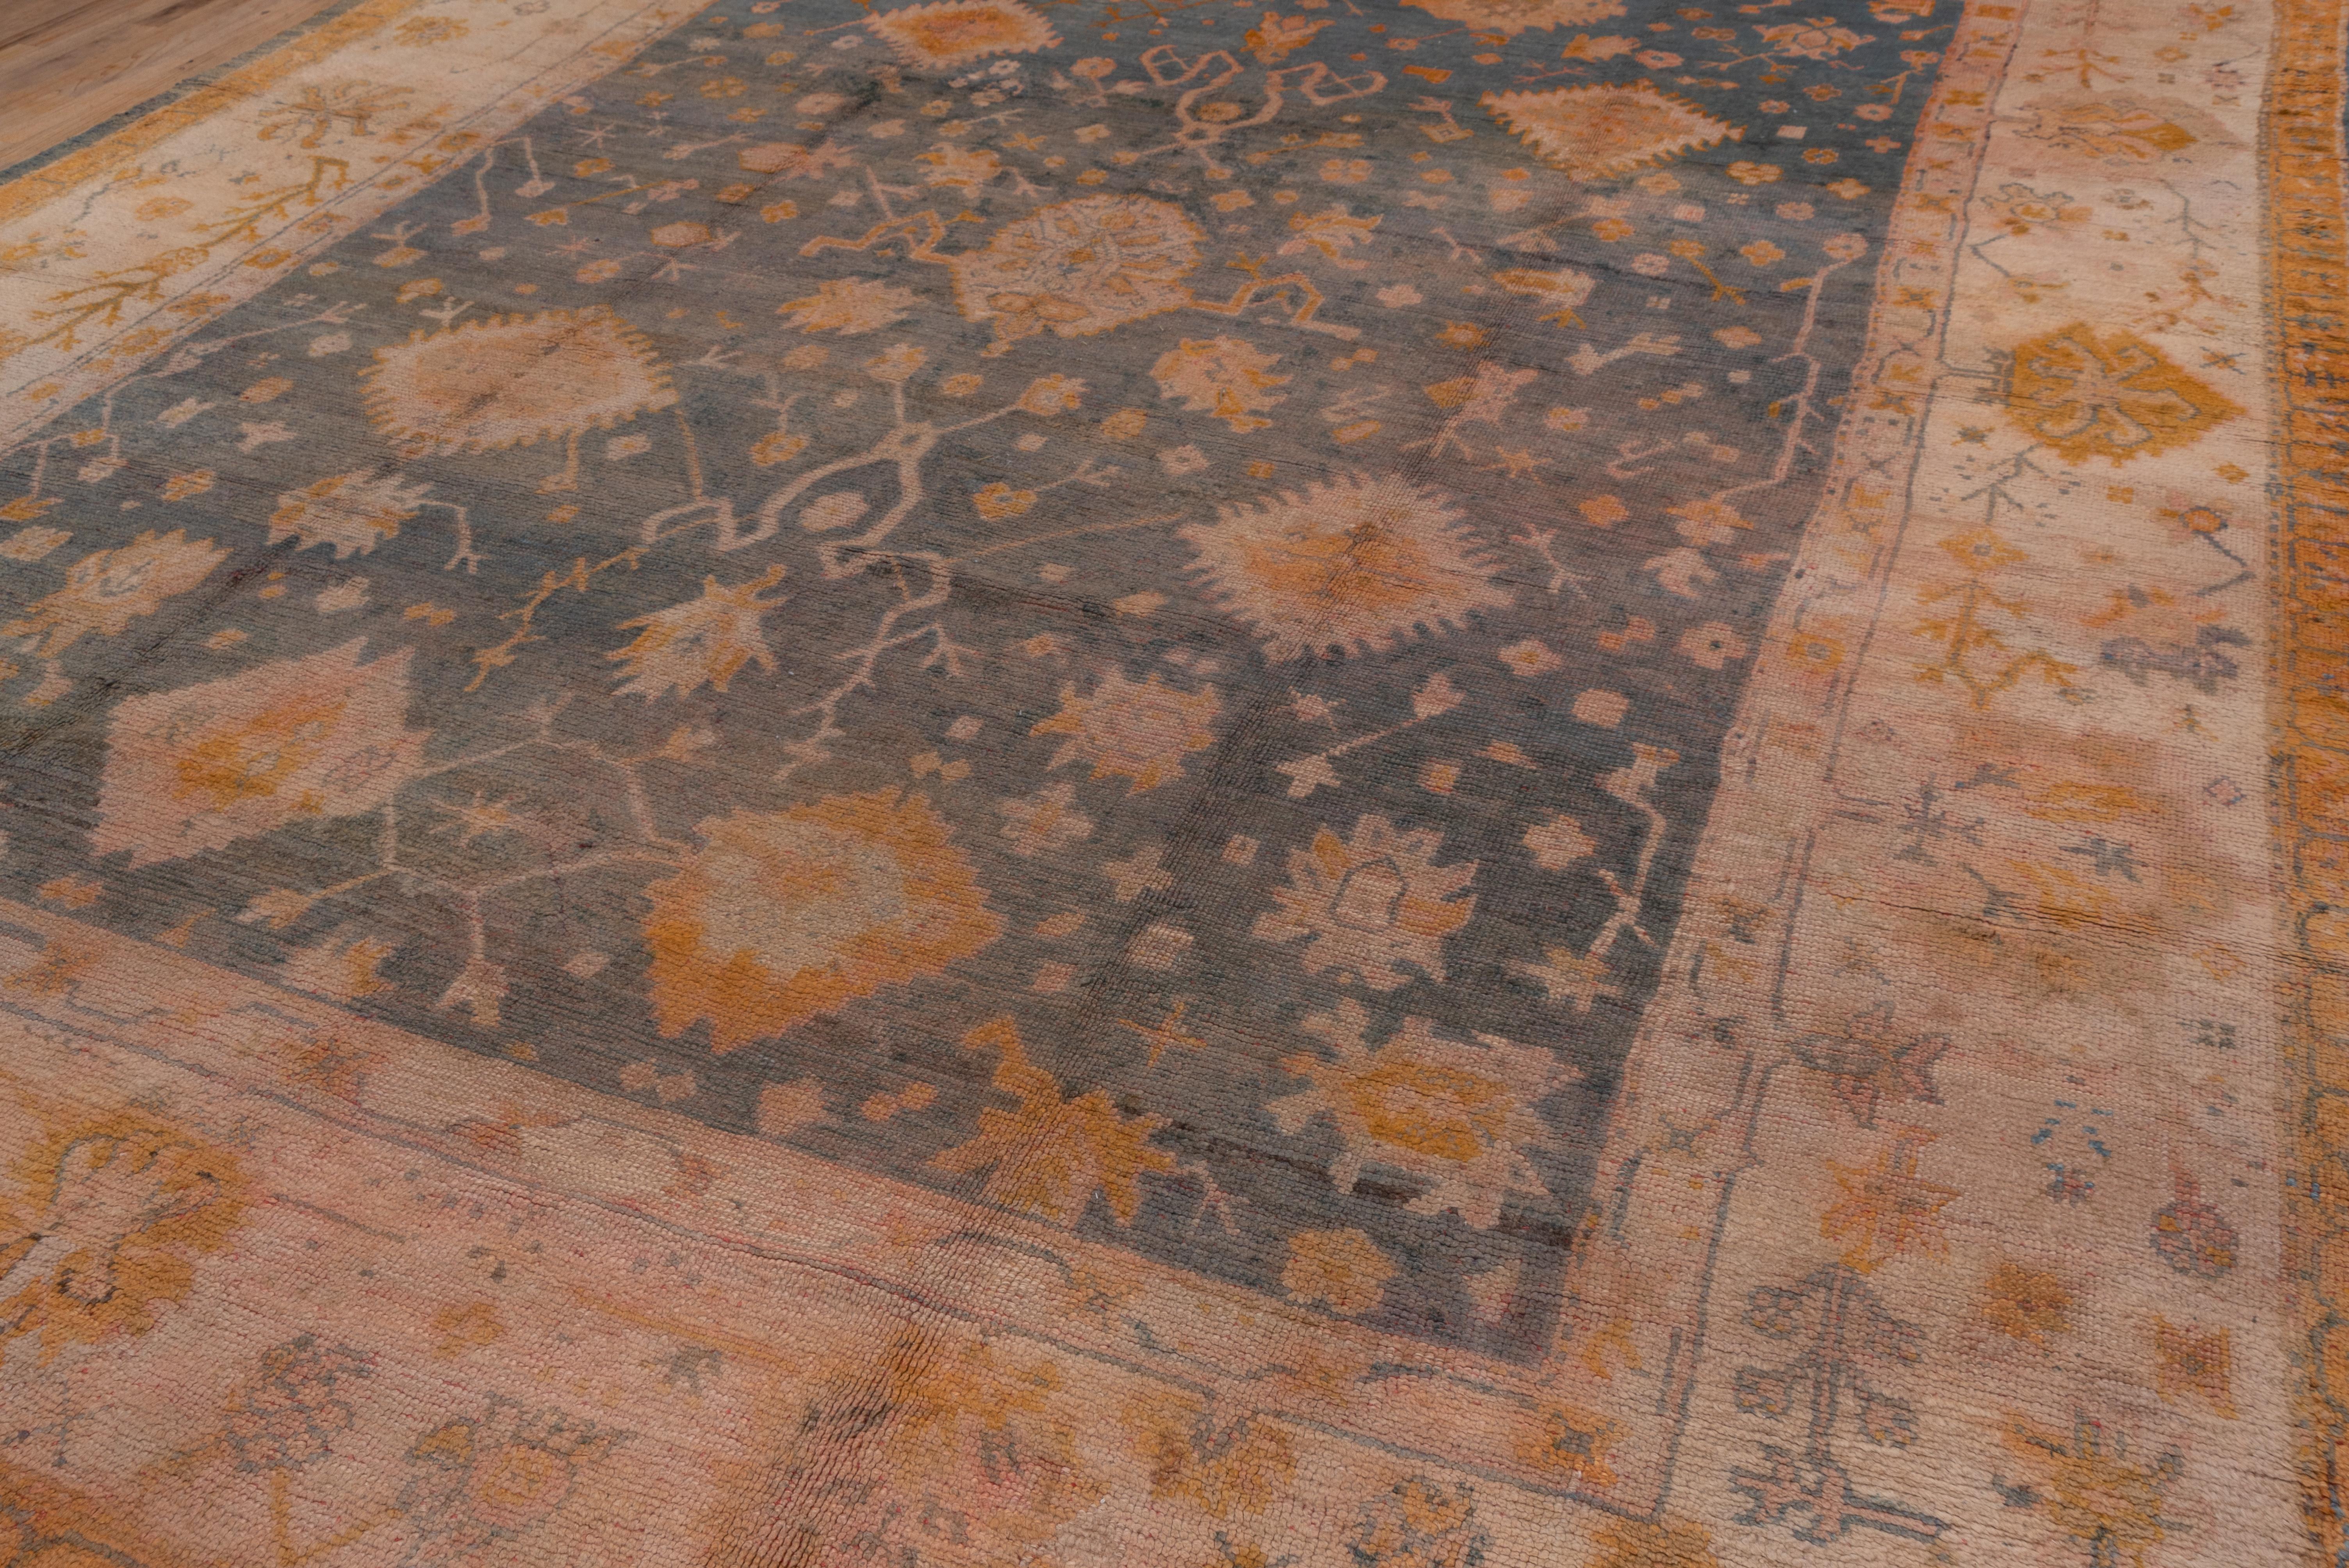 In a general Persian Heriz semi-geometric style, the Turkey red field of this western Anatolian workshop carpet displays a serrated, pendanted and lobed light blue medallion with an octagon center and goldenrod corners sprouting small flowers. The